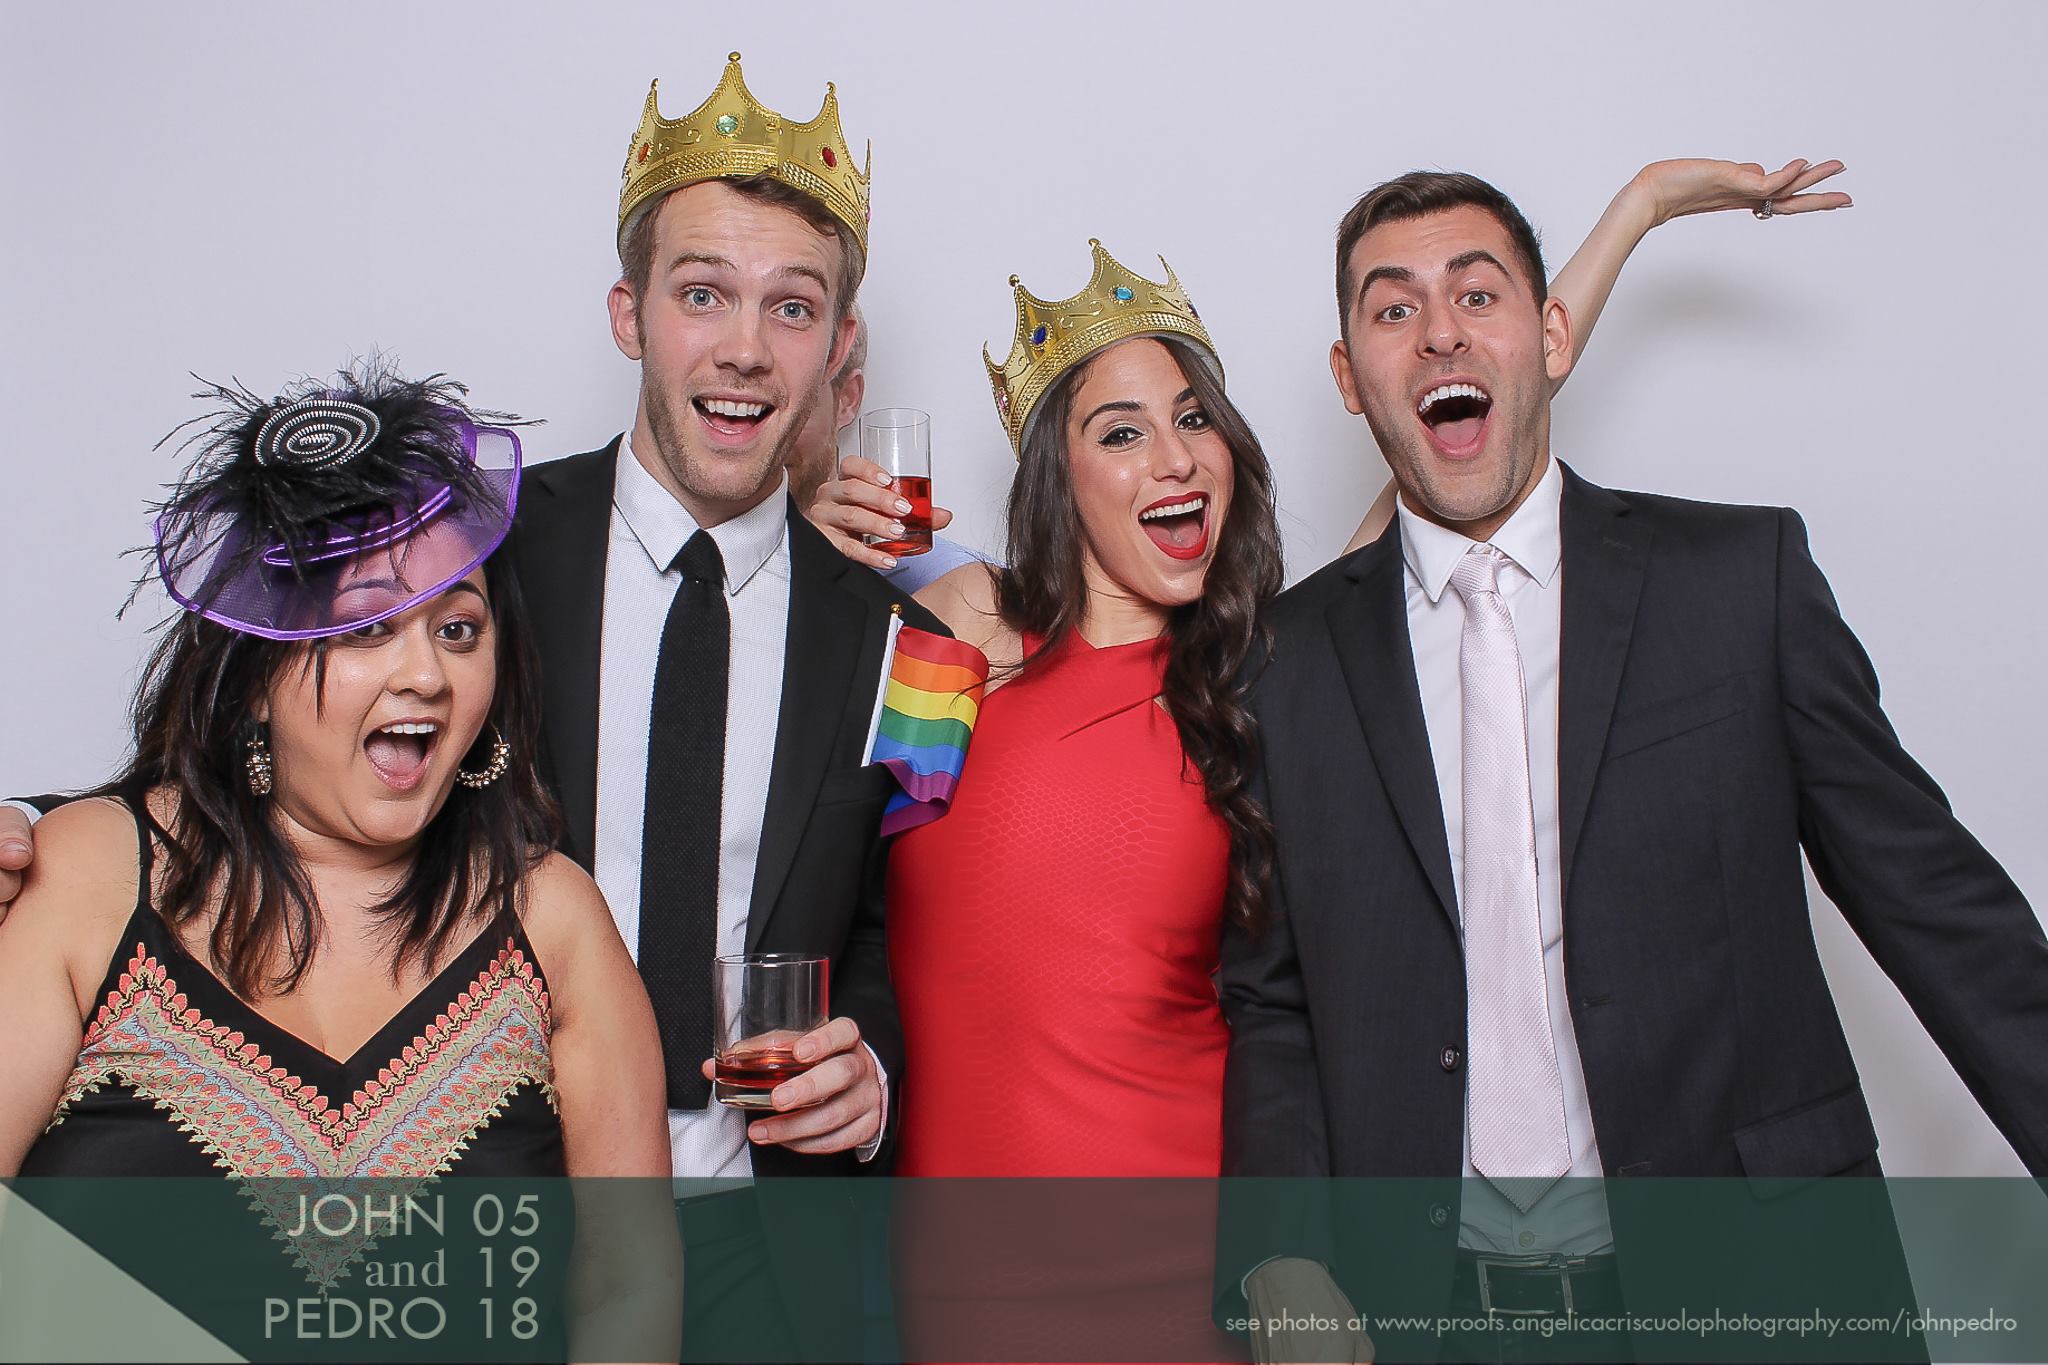 Gary's Loft NYC Photo Booth - InstaMemoryBooth by Angelica Criscuolo Photography 